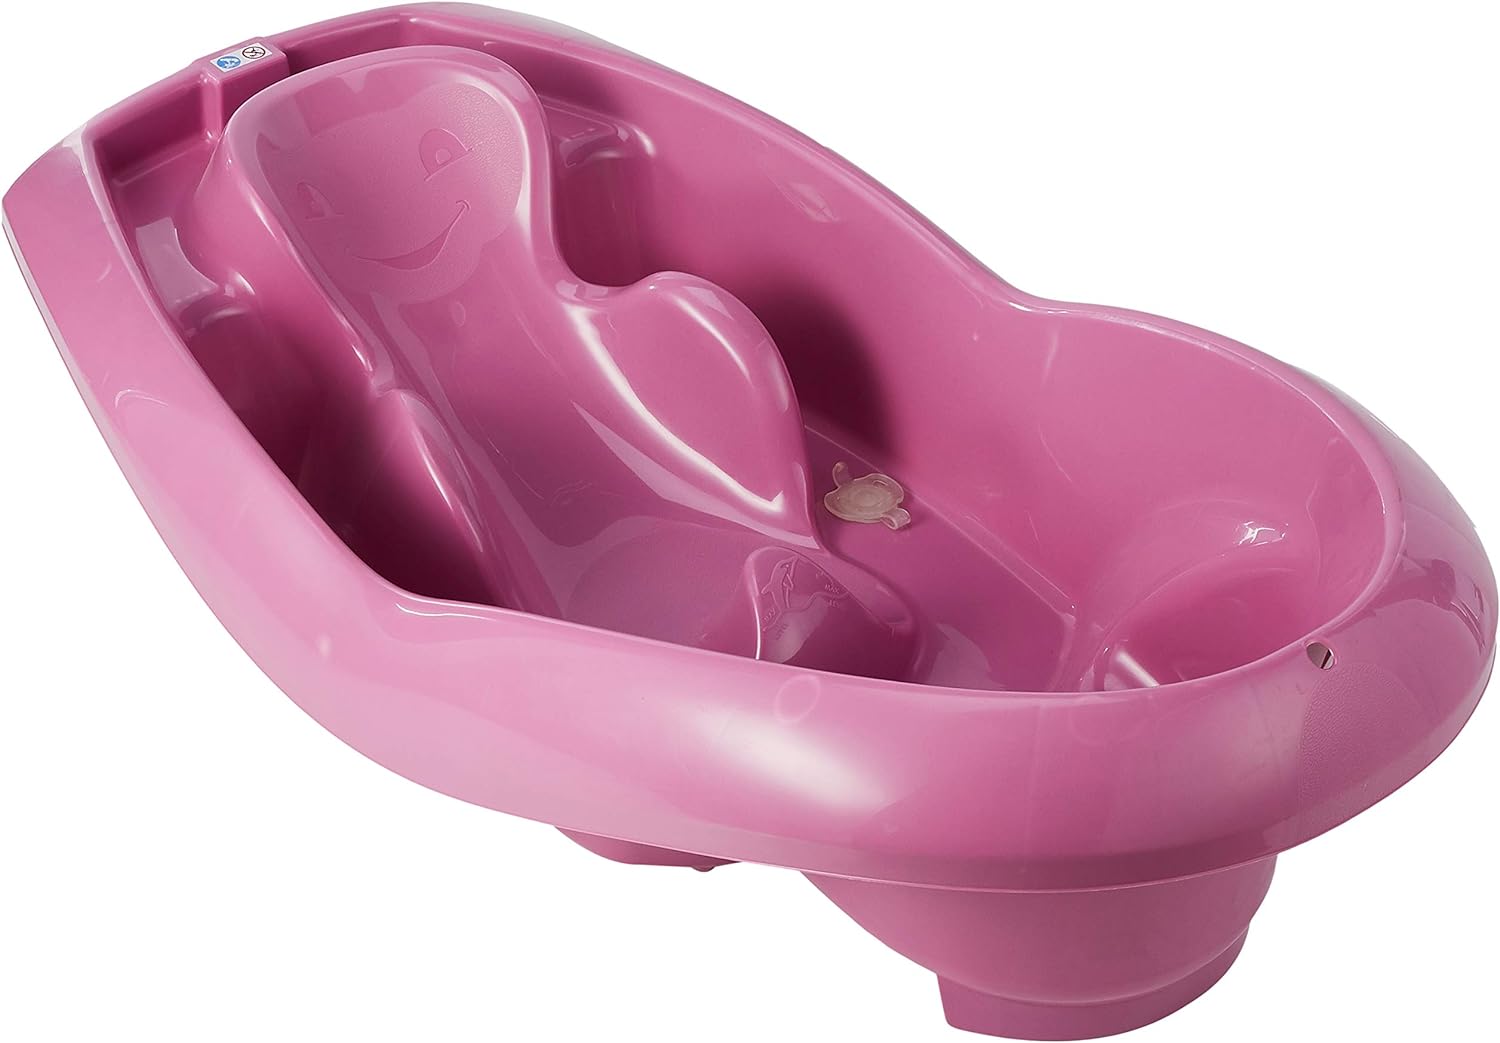 Thermobaby 2-in-1 Lagoon Bathtub, Orchid Pink, 1040 grams